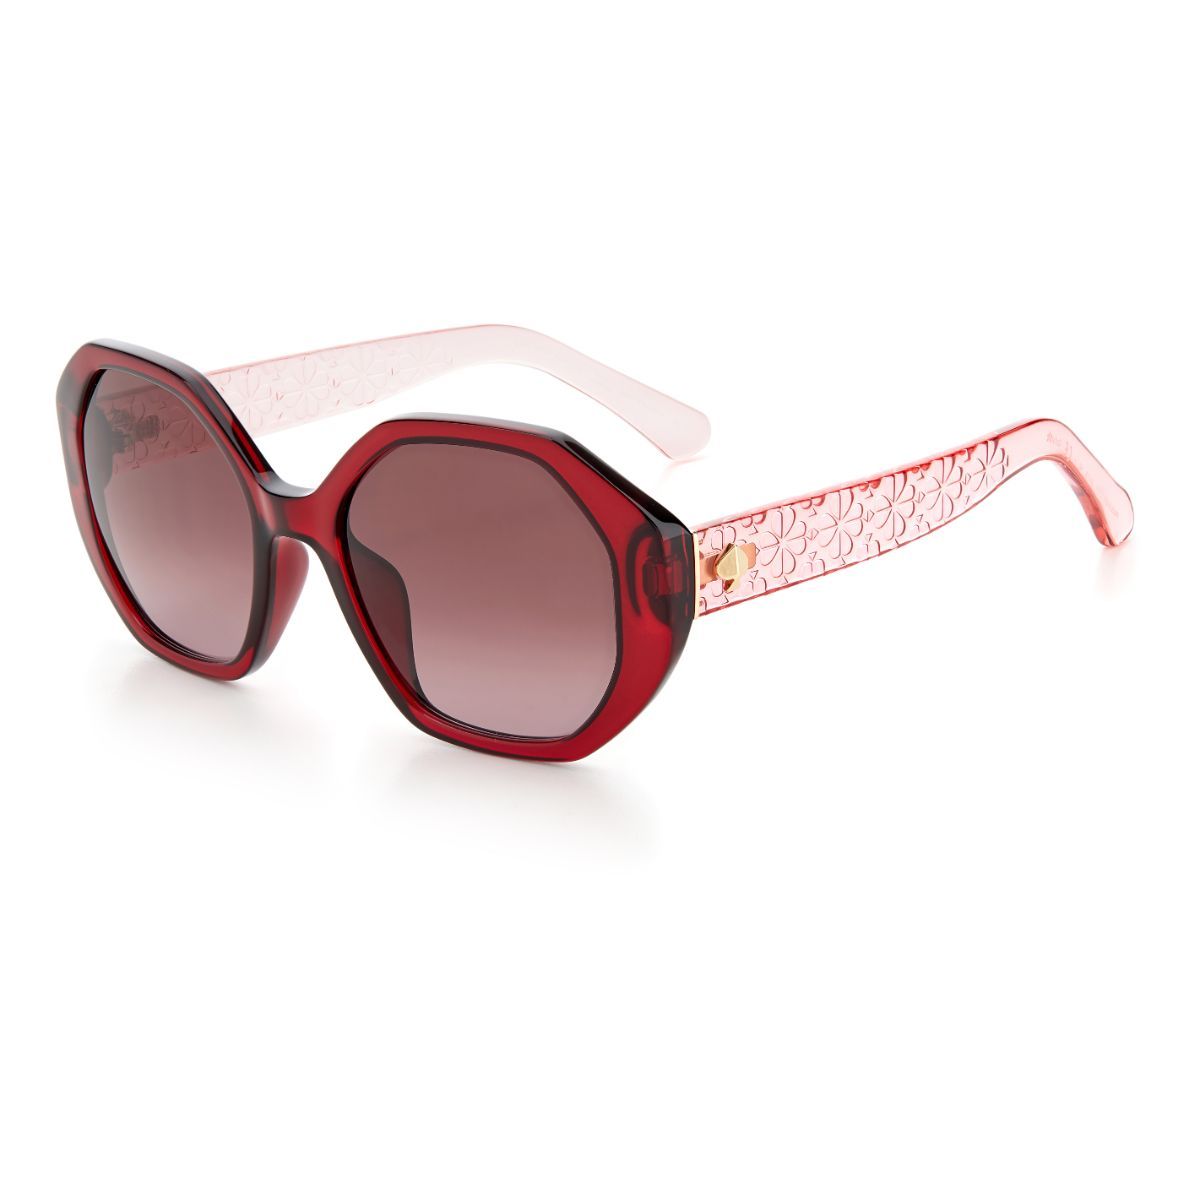 Kate Spade Red Women Oval Sunglasses With Uv Protected Lens Ksp Preslee/g/s  Lhf: Buy Kate Spade Red Women Oval Sunglasses With Uv Protected Lens Ksp  Preslee/g/s Lhf Online at Best Price in